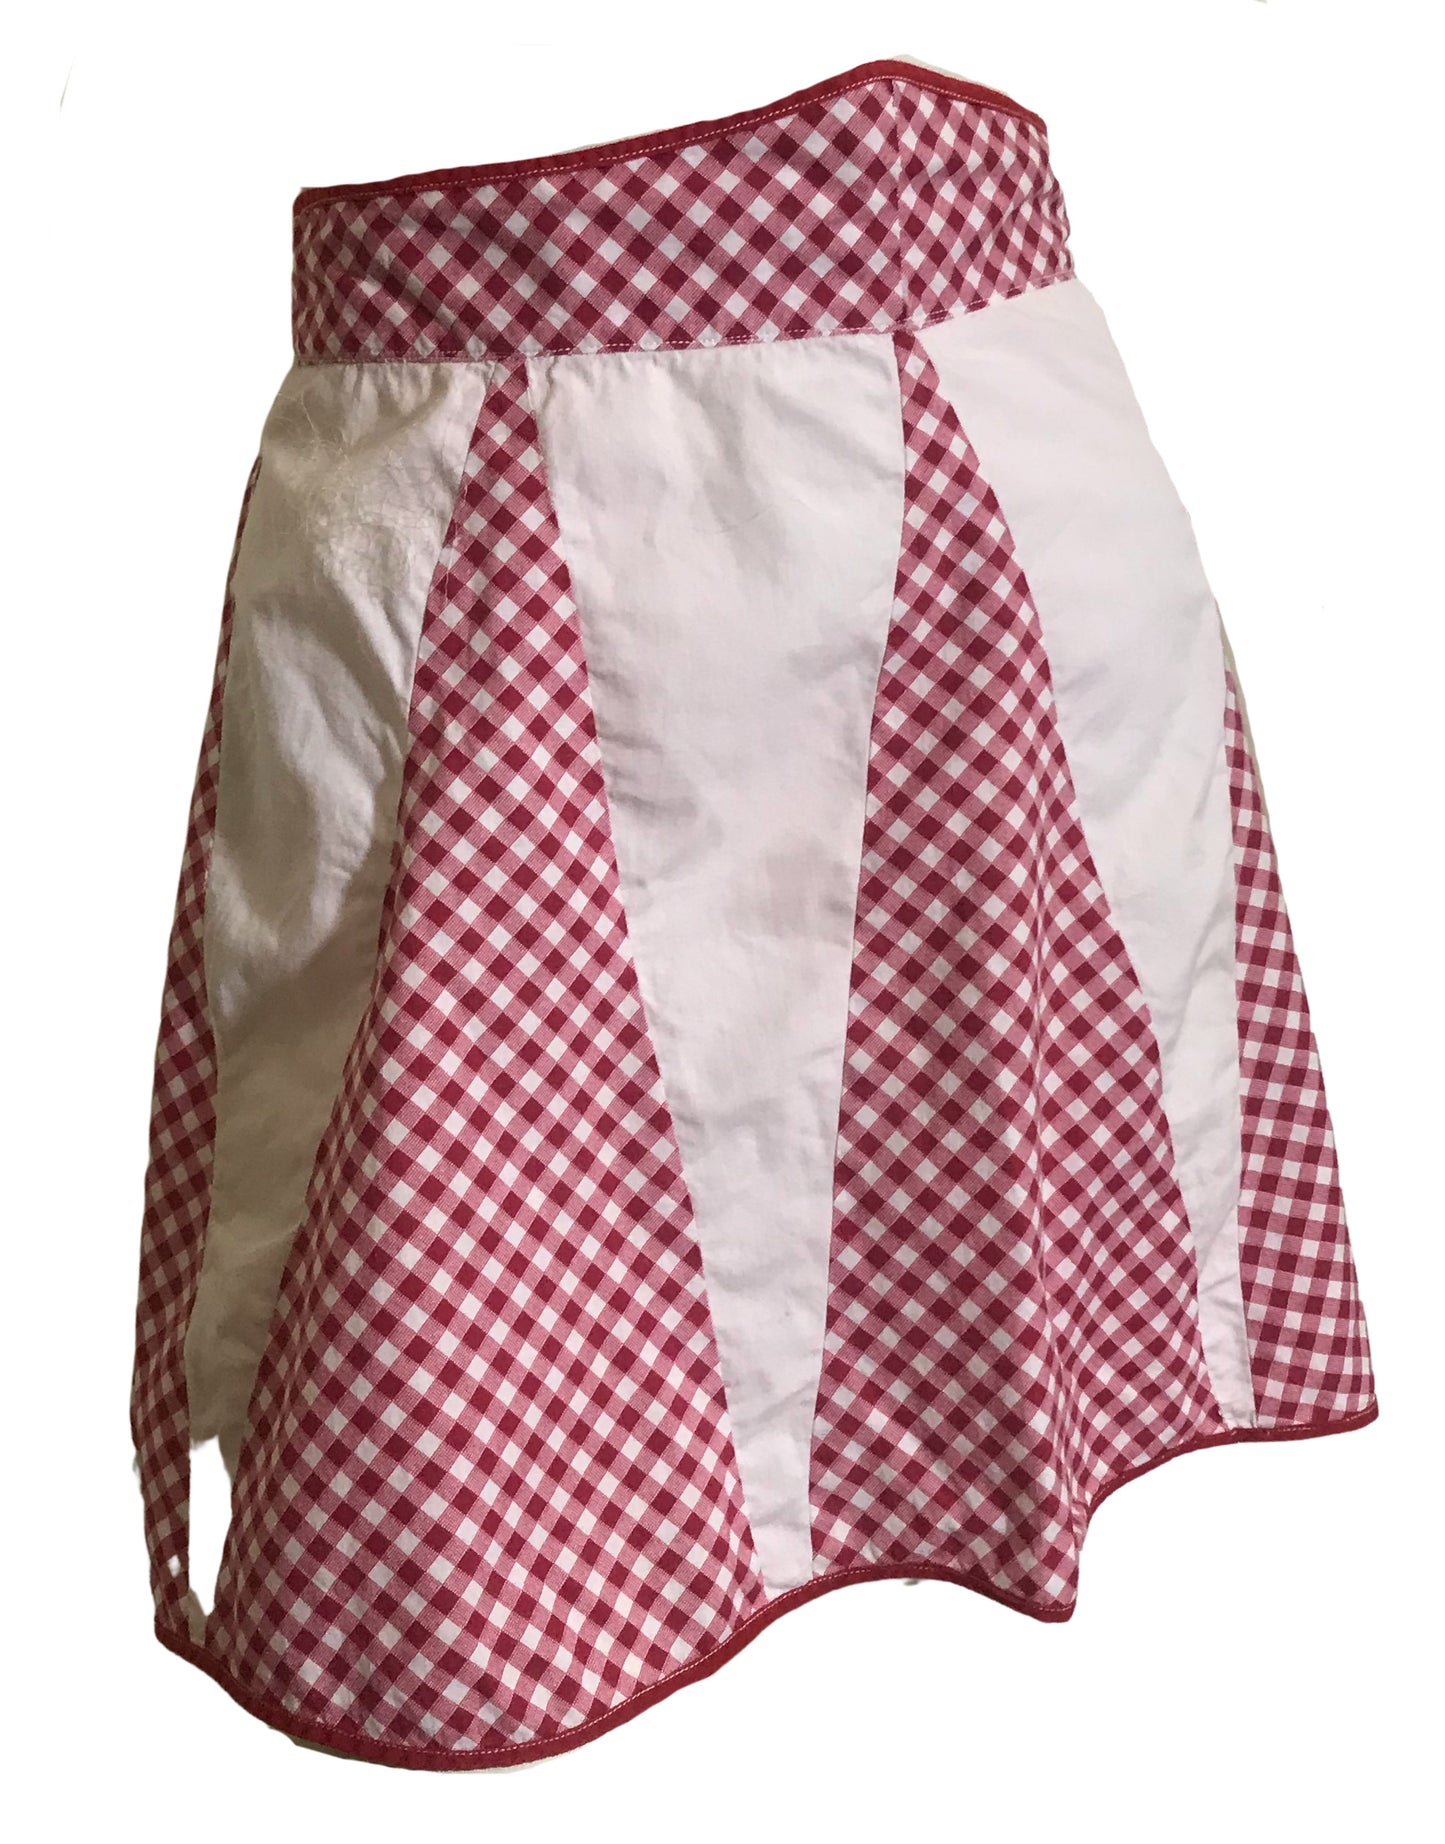 Red and White Gingham Cotton Apron circa 1960s